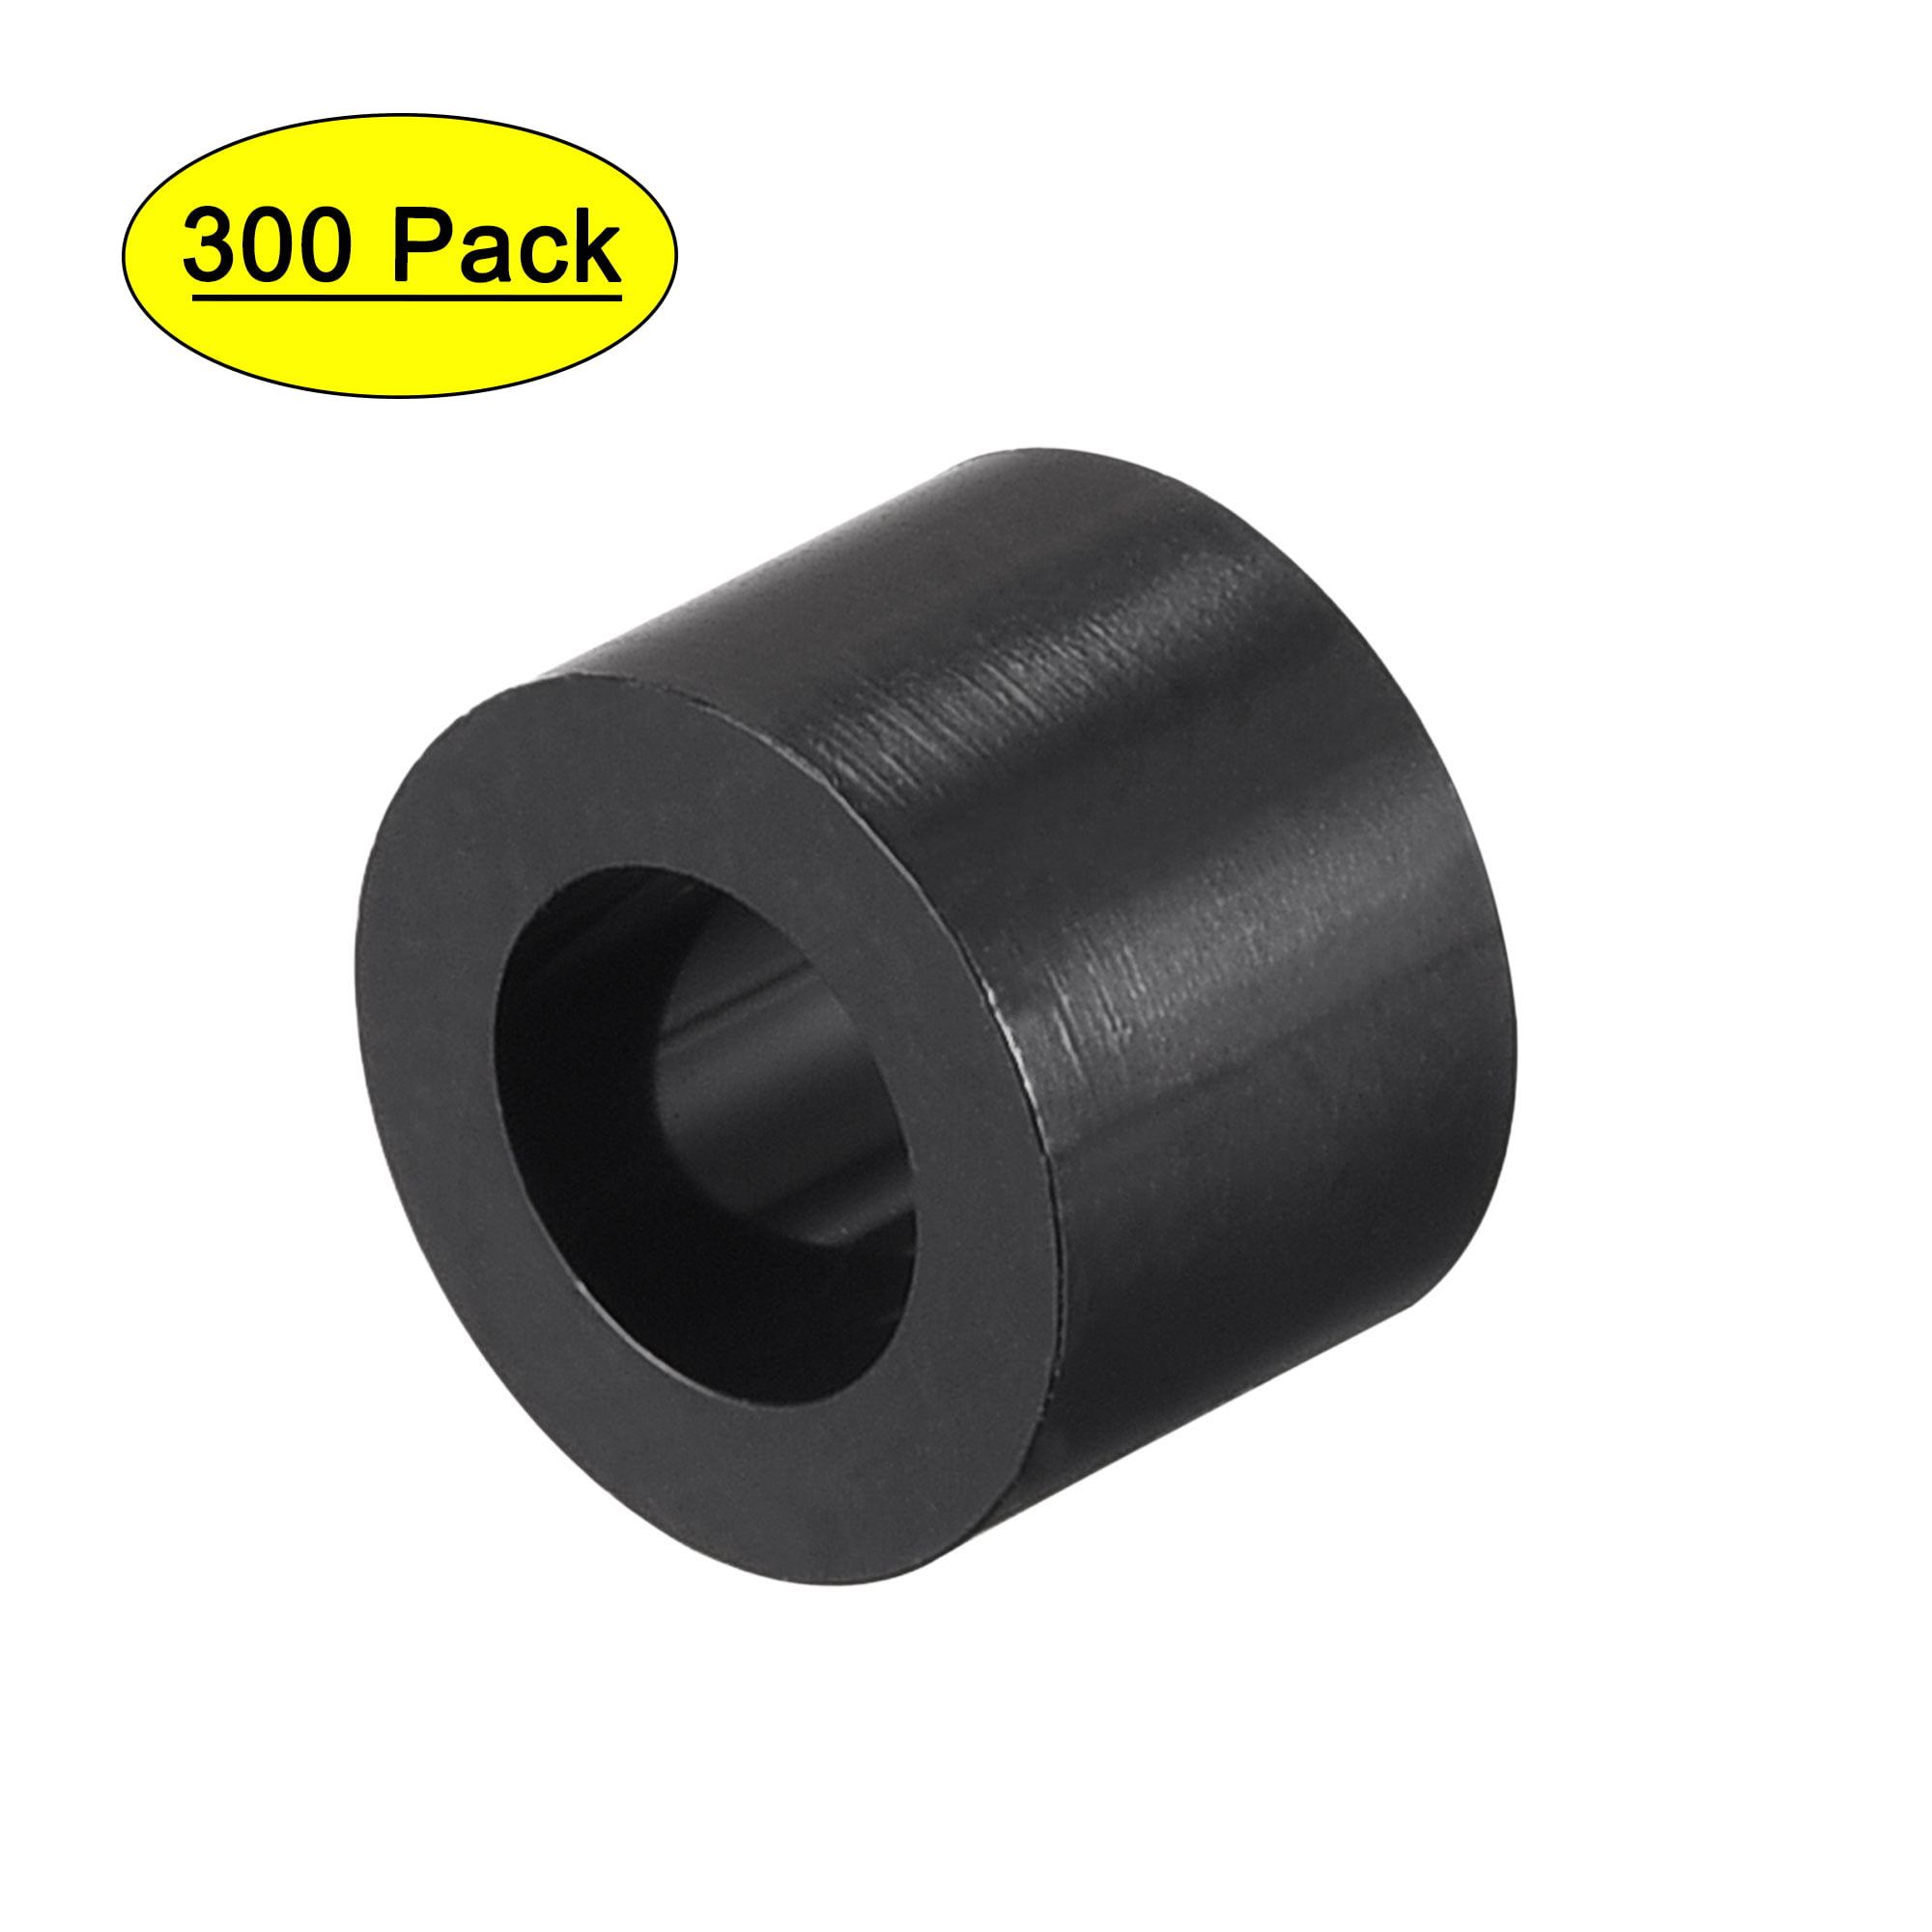 uxcell Nylon Round Spacer Washer 4.2mm ID 7mm OD 4mm Height for M4 Screws Black 100Pcs 